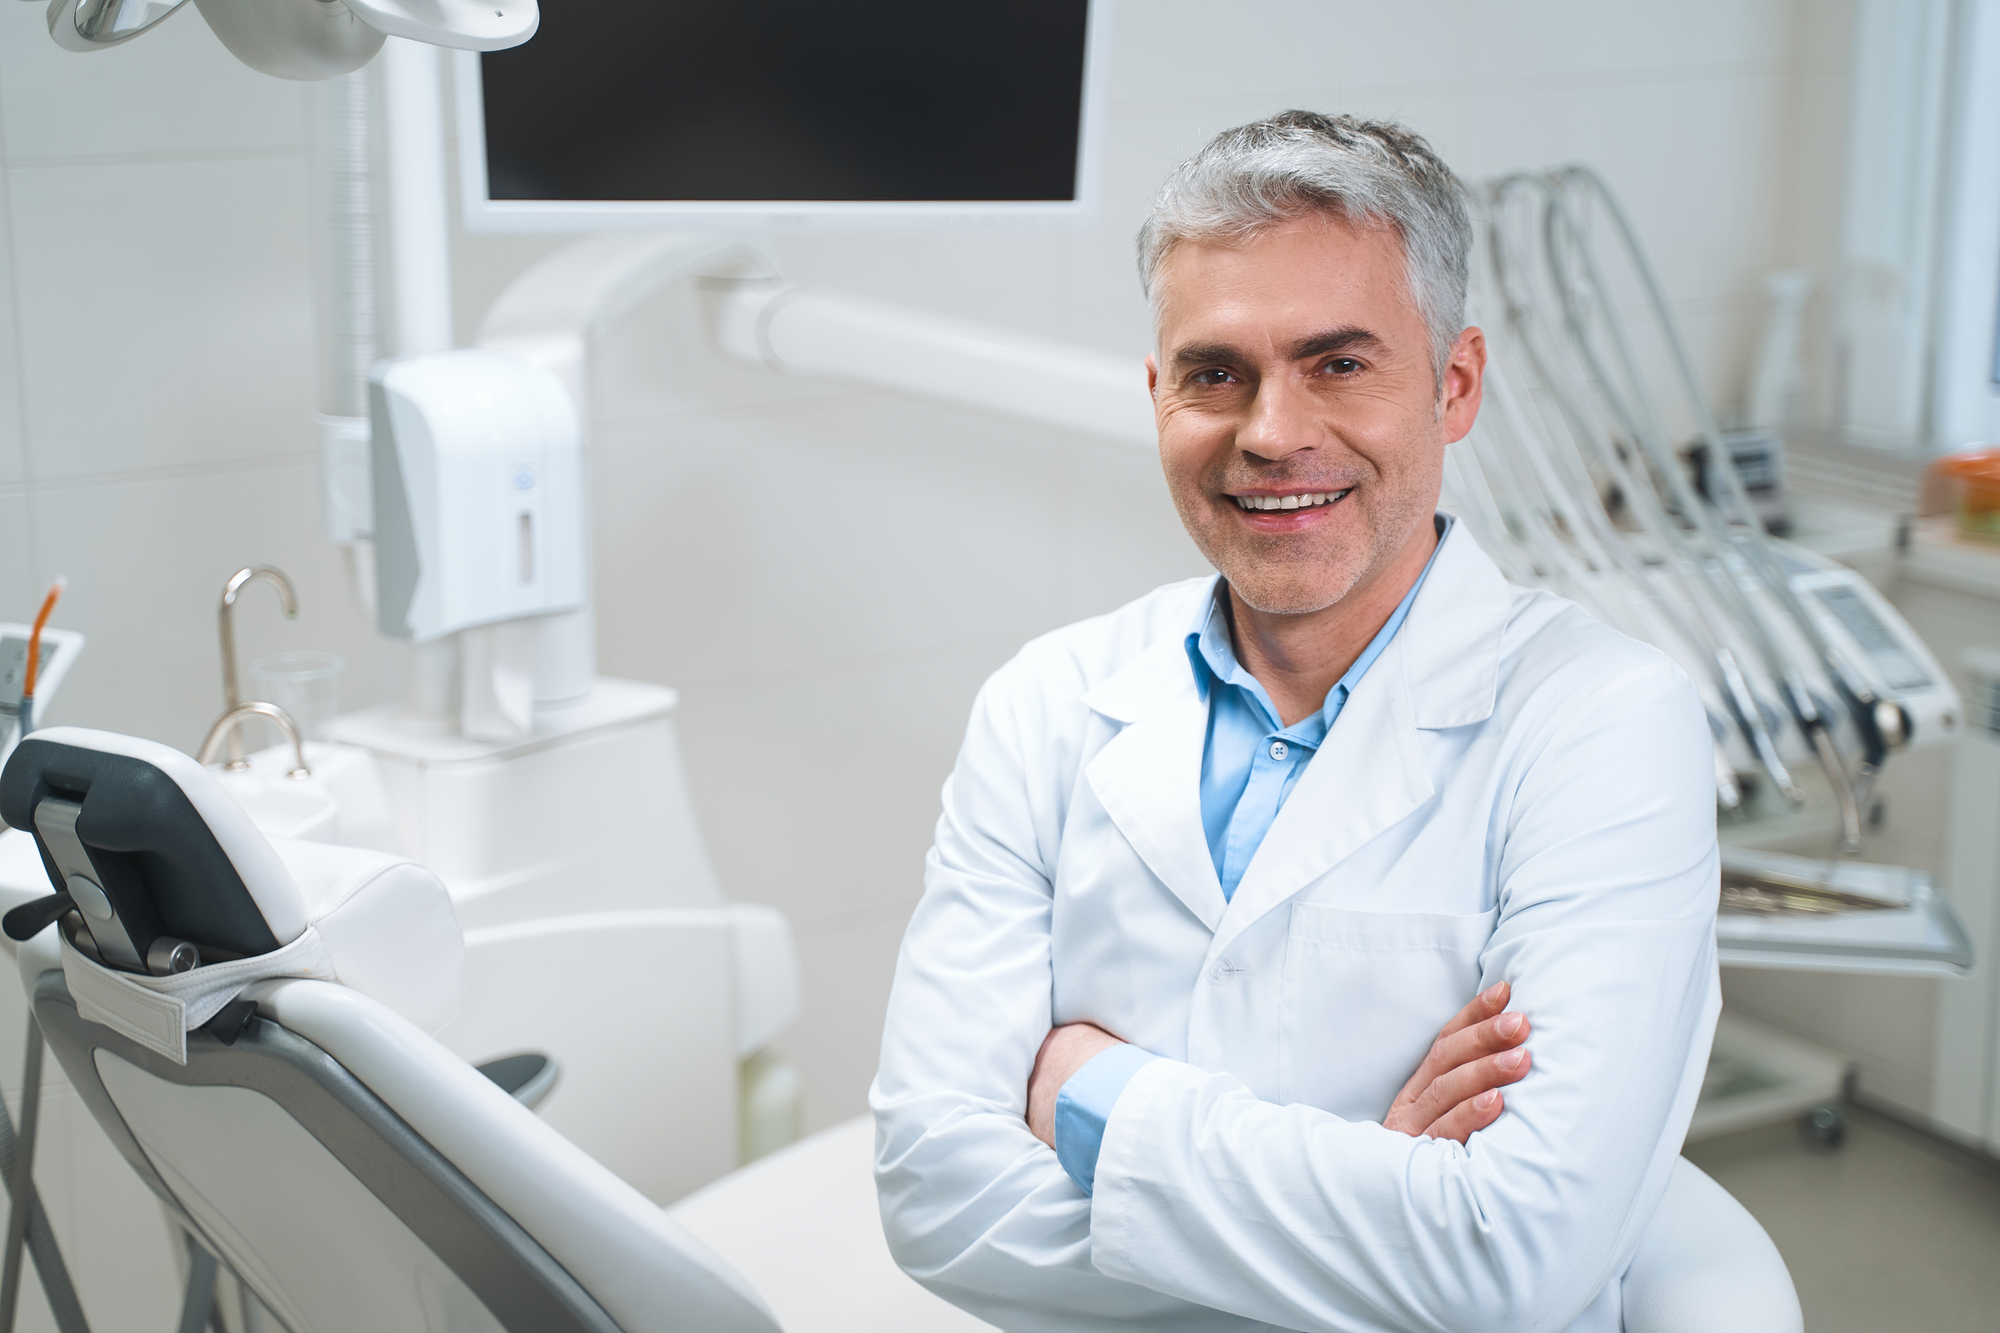 Finding the Best Dentist Near Me: Tips and Recommendations